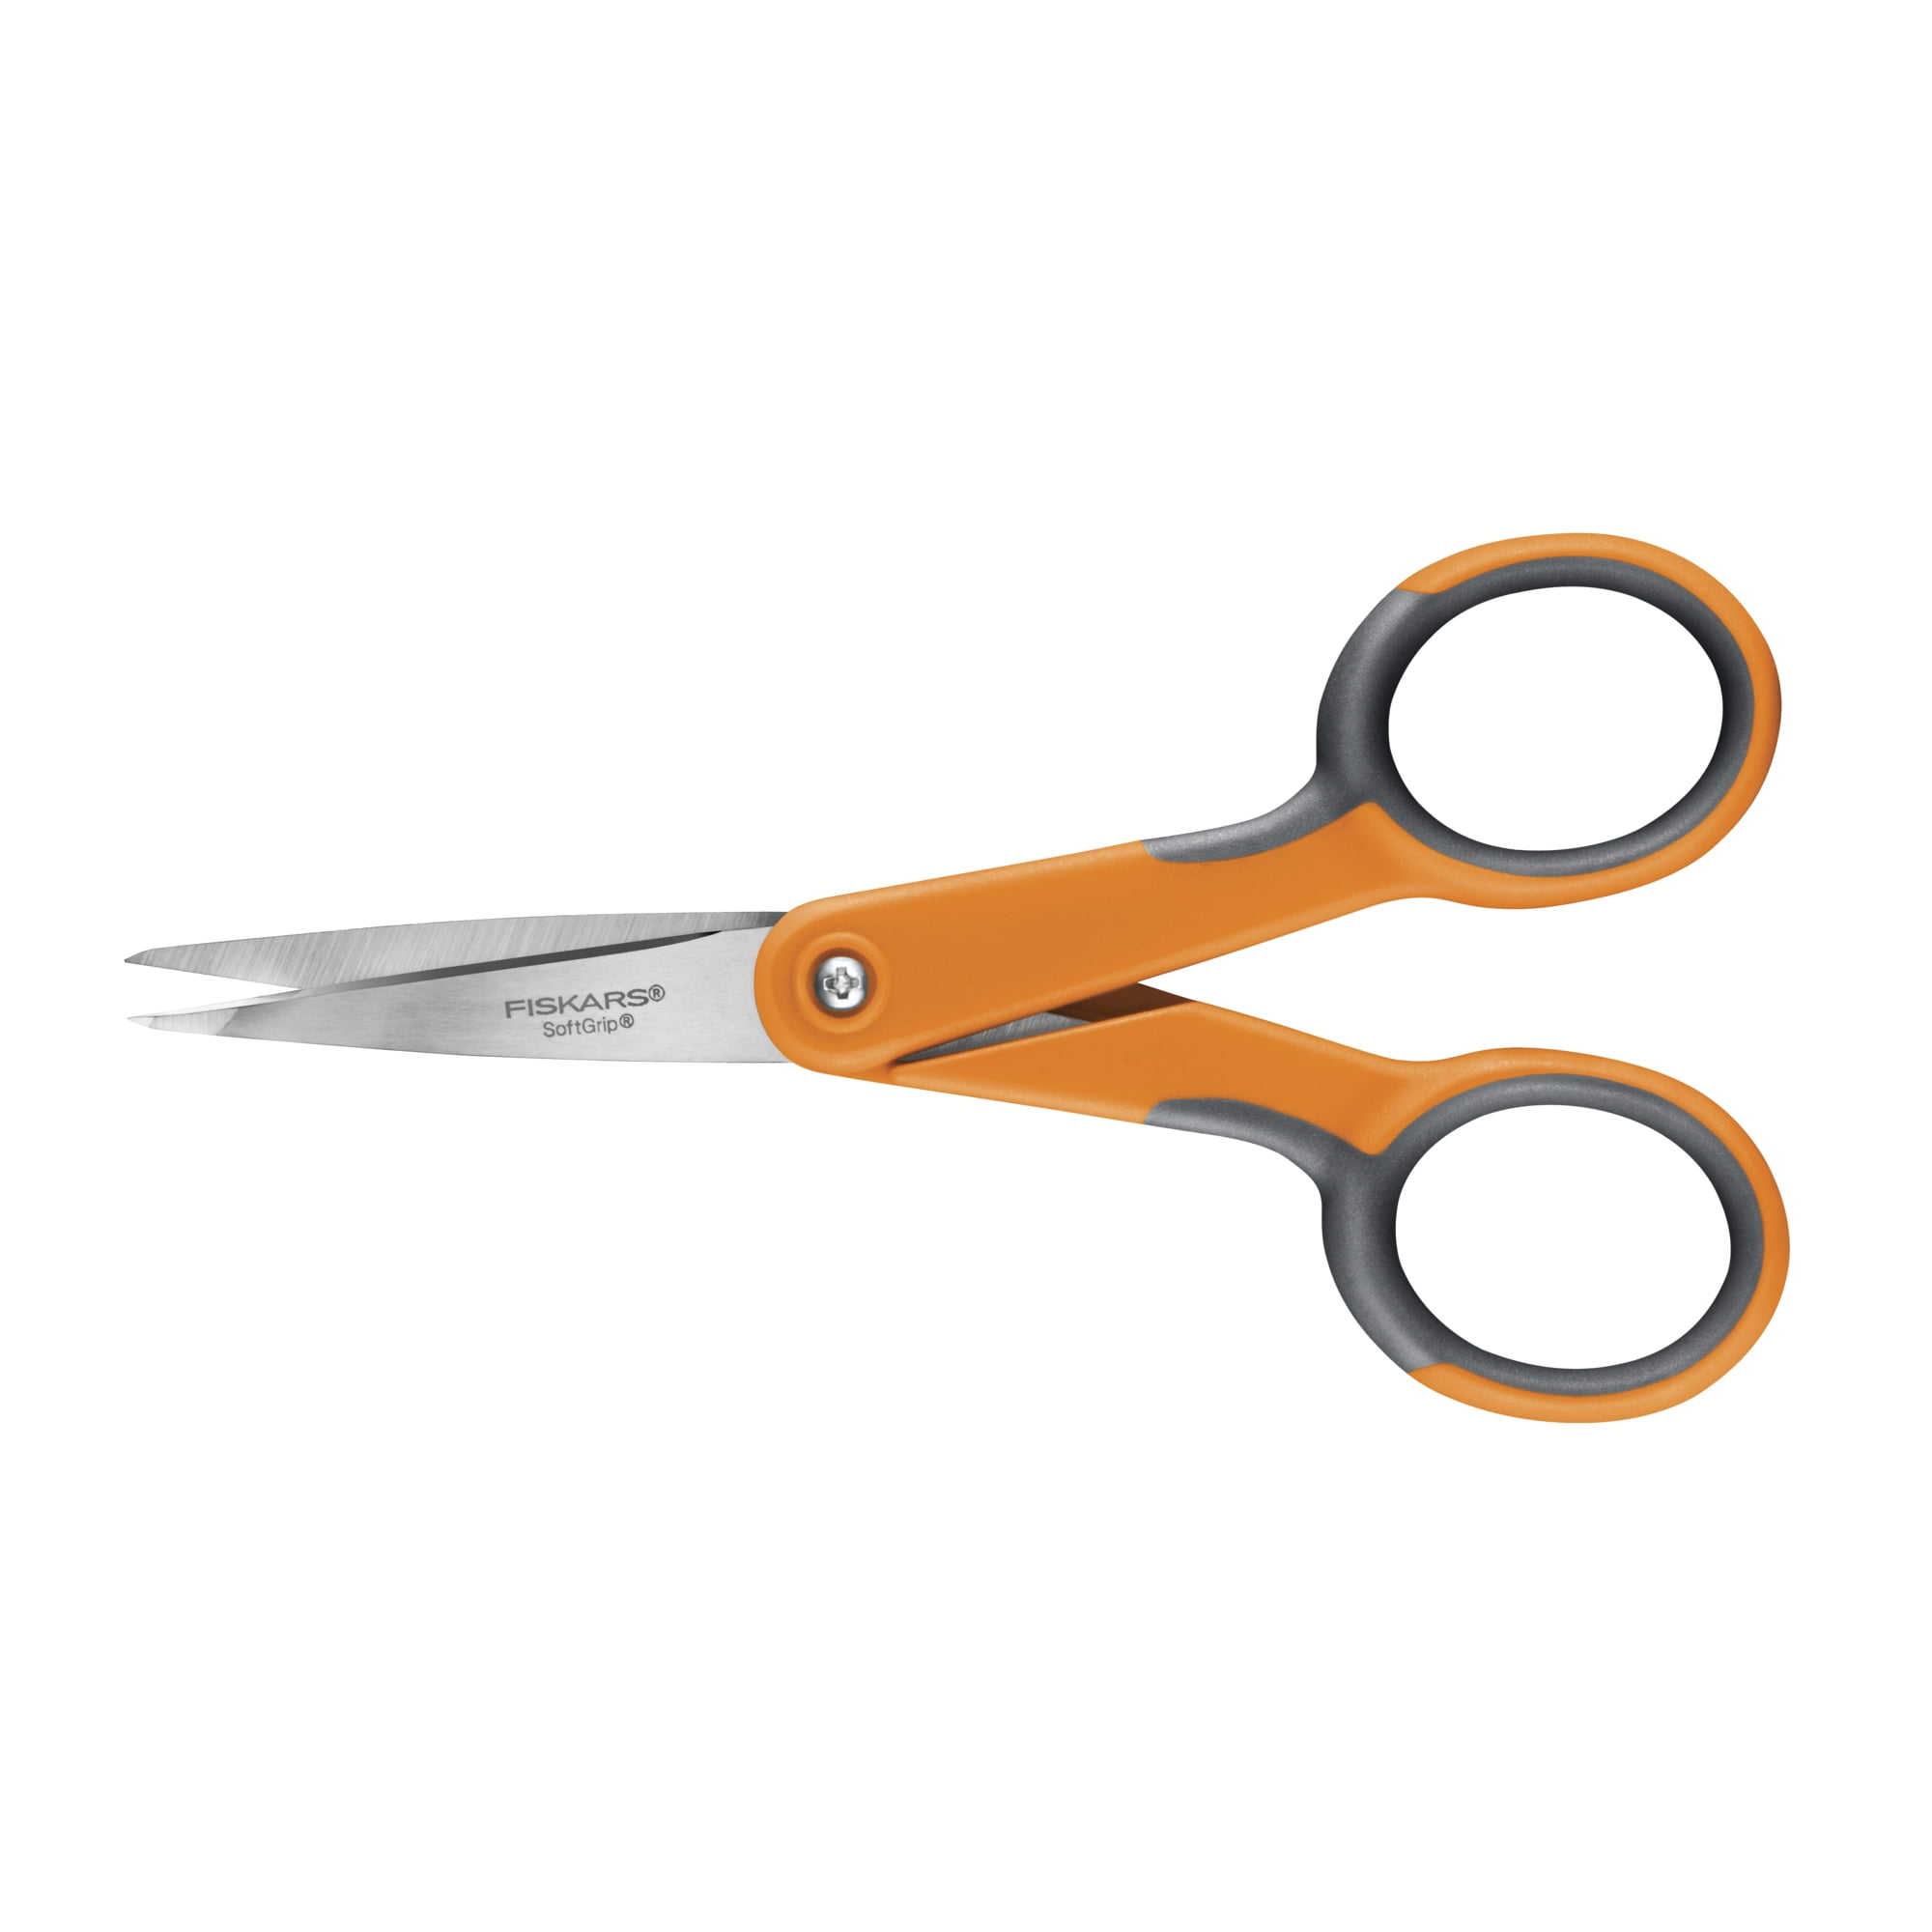 Glexal Small Embroidery Scissors with Cover -Cute and Comfortable handles  with Sturdy and Sharp Tips for Precise Cutting, Perfect Size for Keeping in